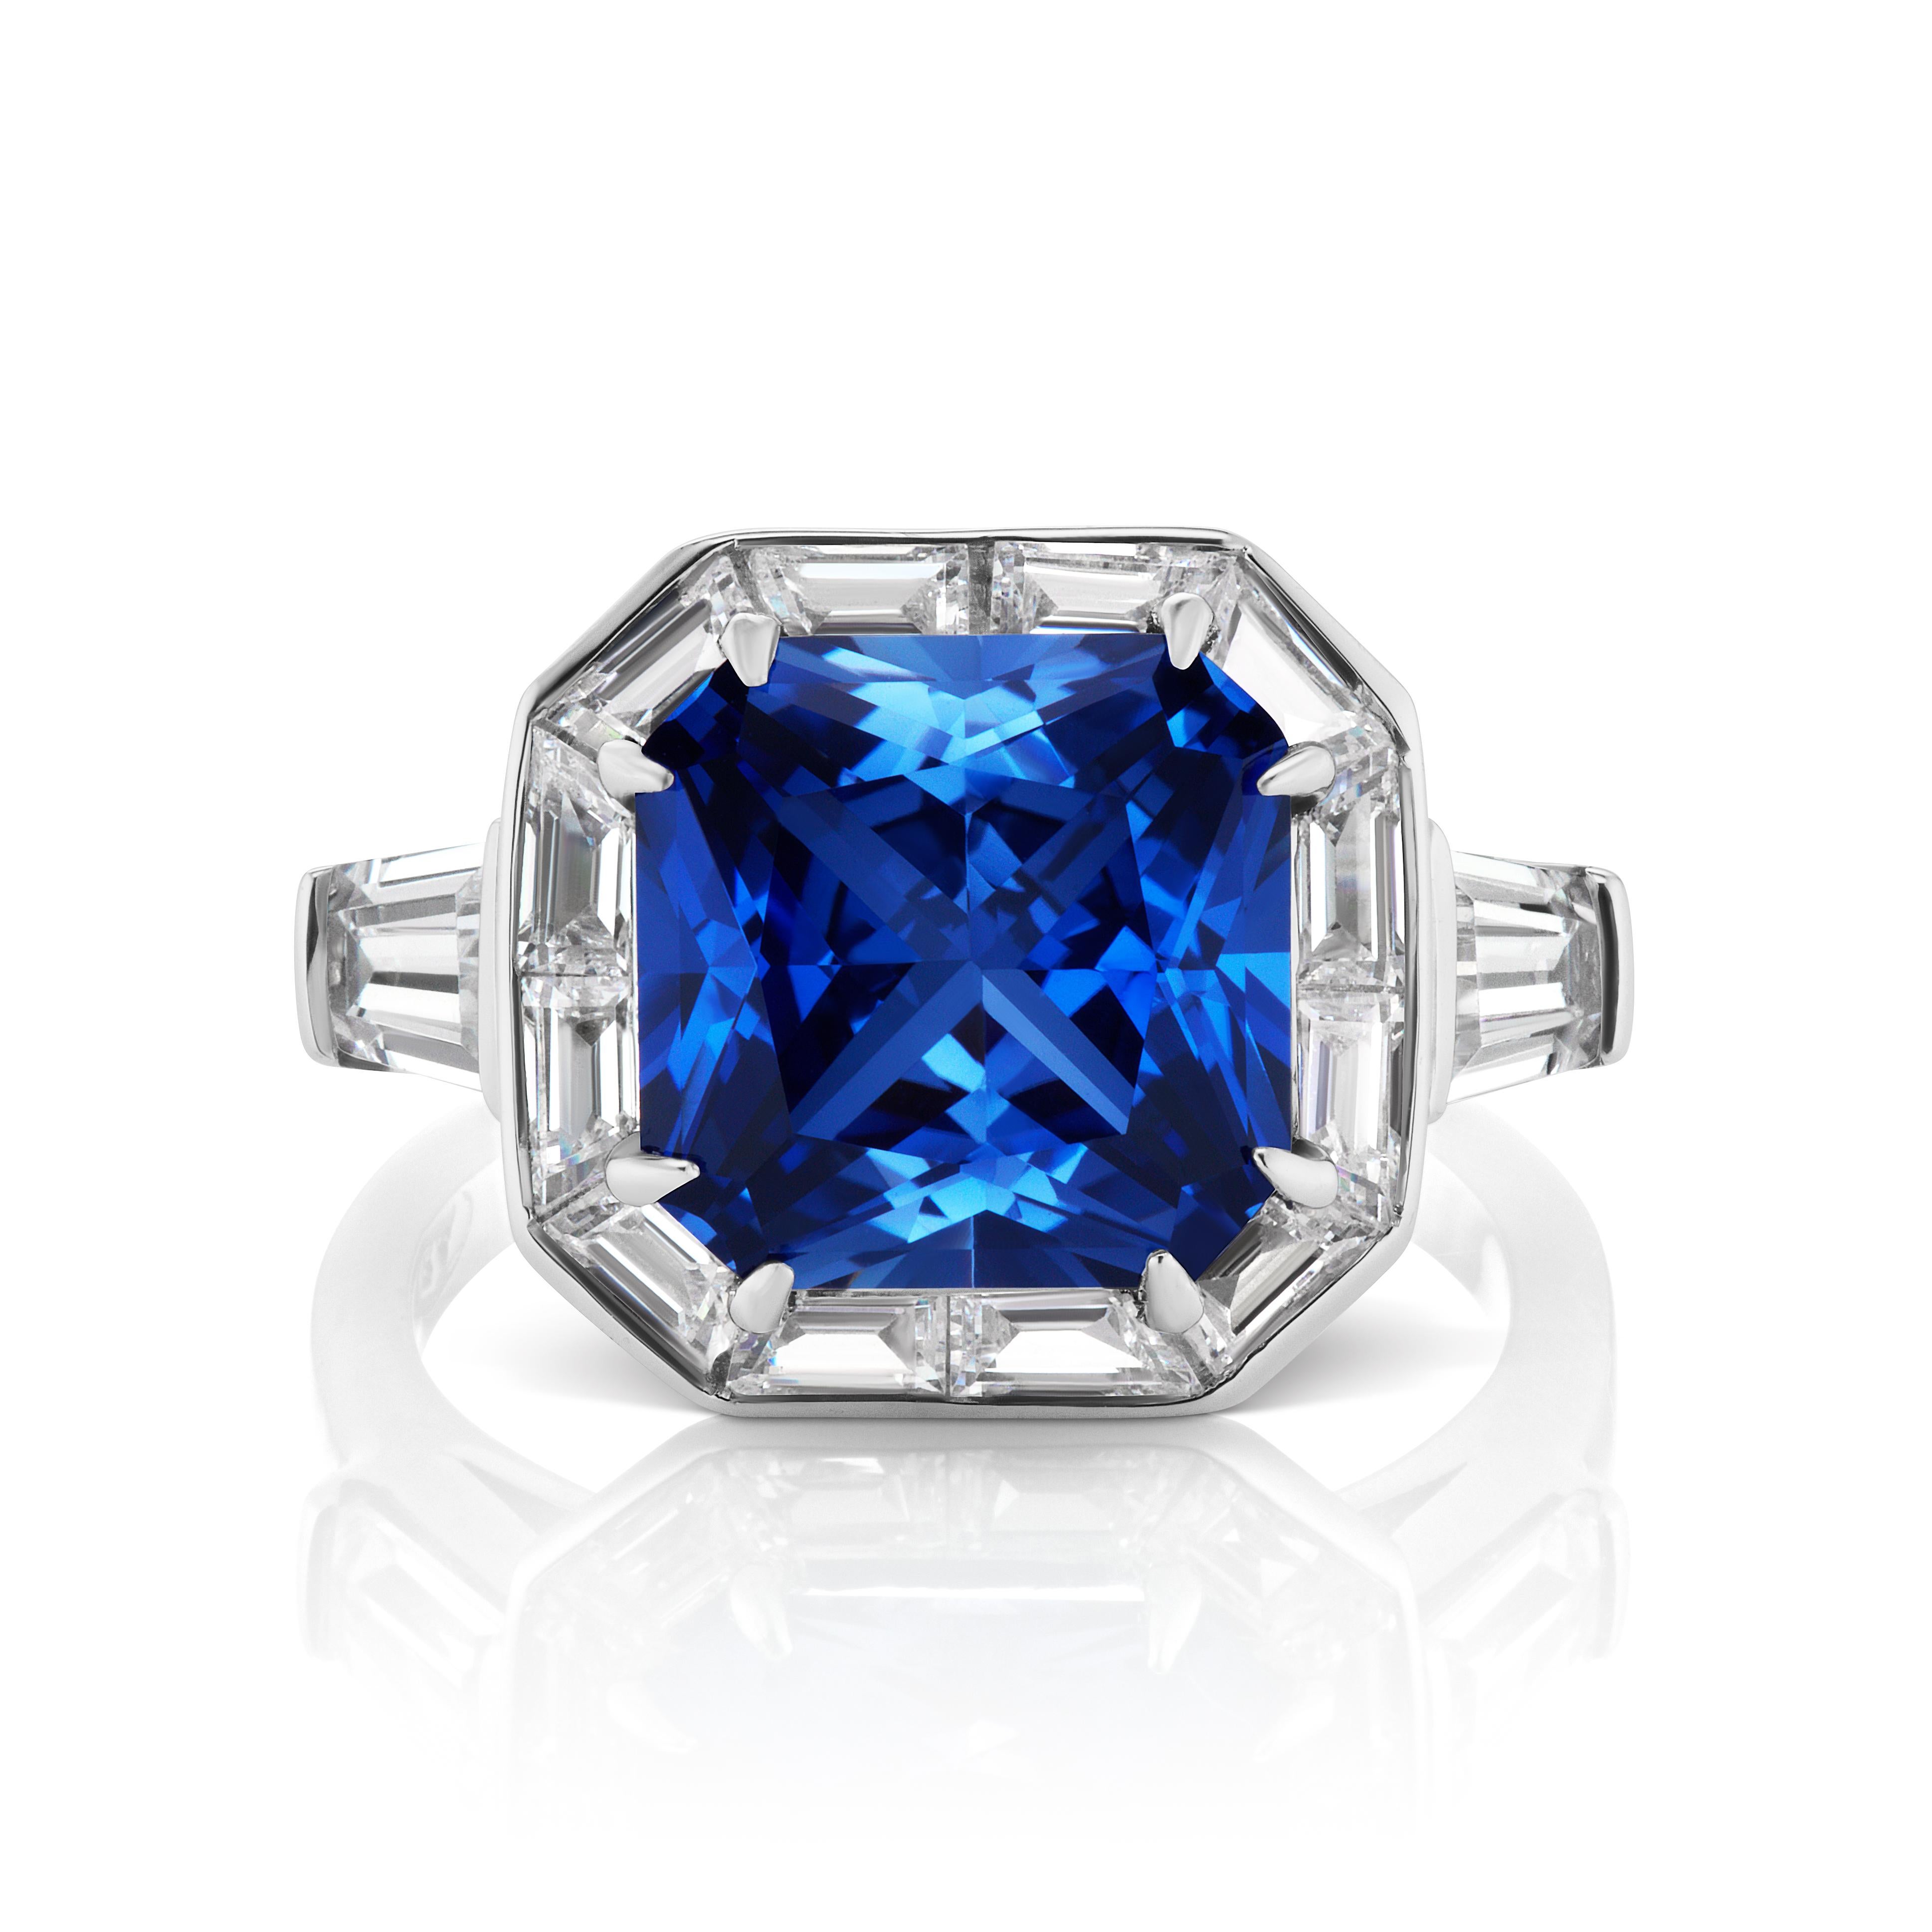 Women's Art Deco Style Square Synthetic Sapphire Halo Style Sterling Silver Ring